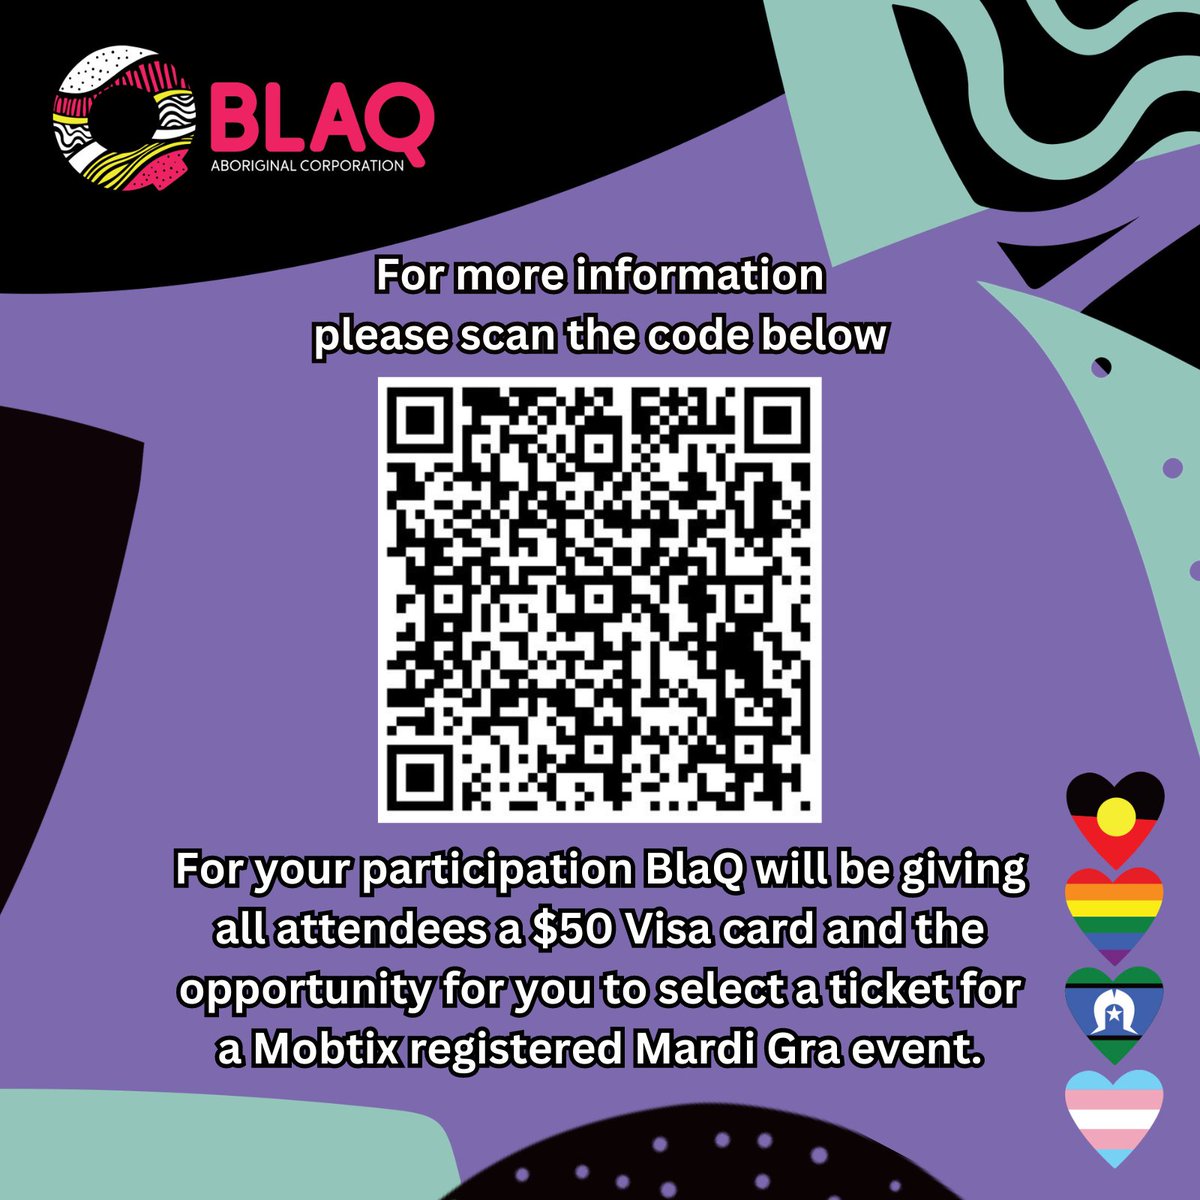 BlaQ is pleased to invite you to participate in an Australian Government roundtable as part of national consultation to inform Australia’s first 10 Year National Action Plan for the Health and Wellbeing of First Nations LGBTIQA+SB people (Action Plan) tinyurl.com/bdexwnre